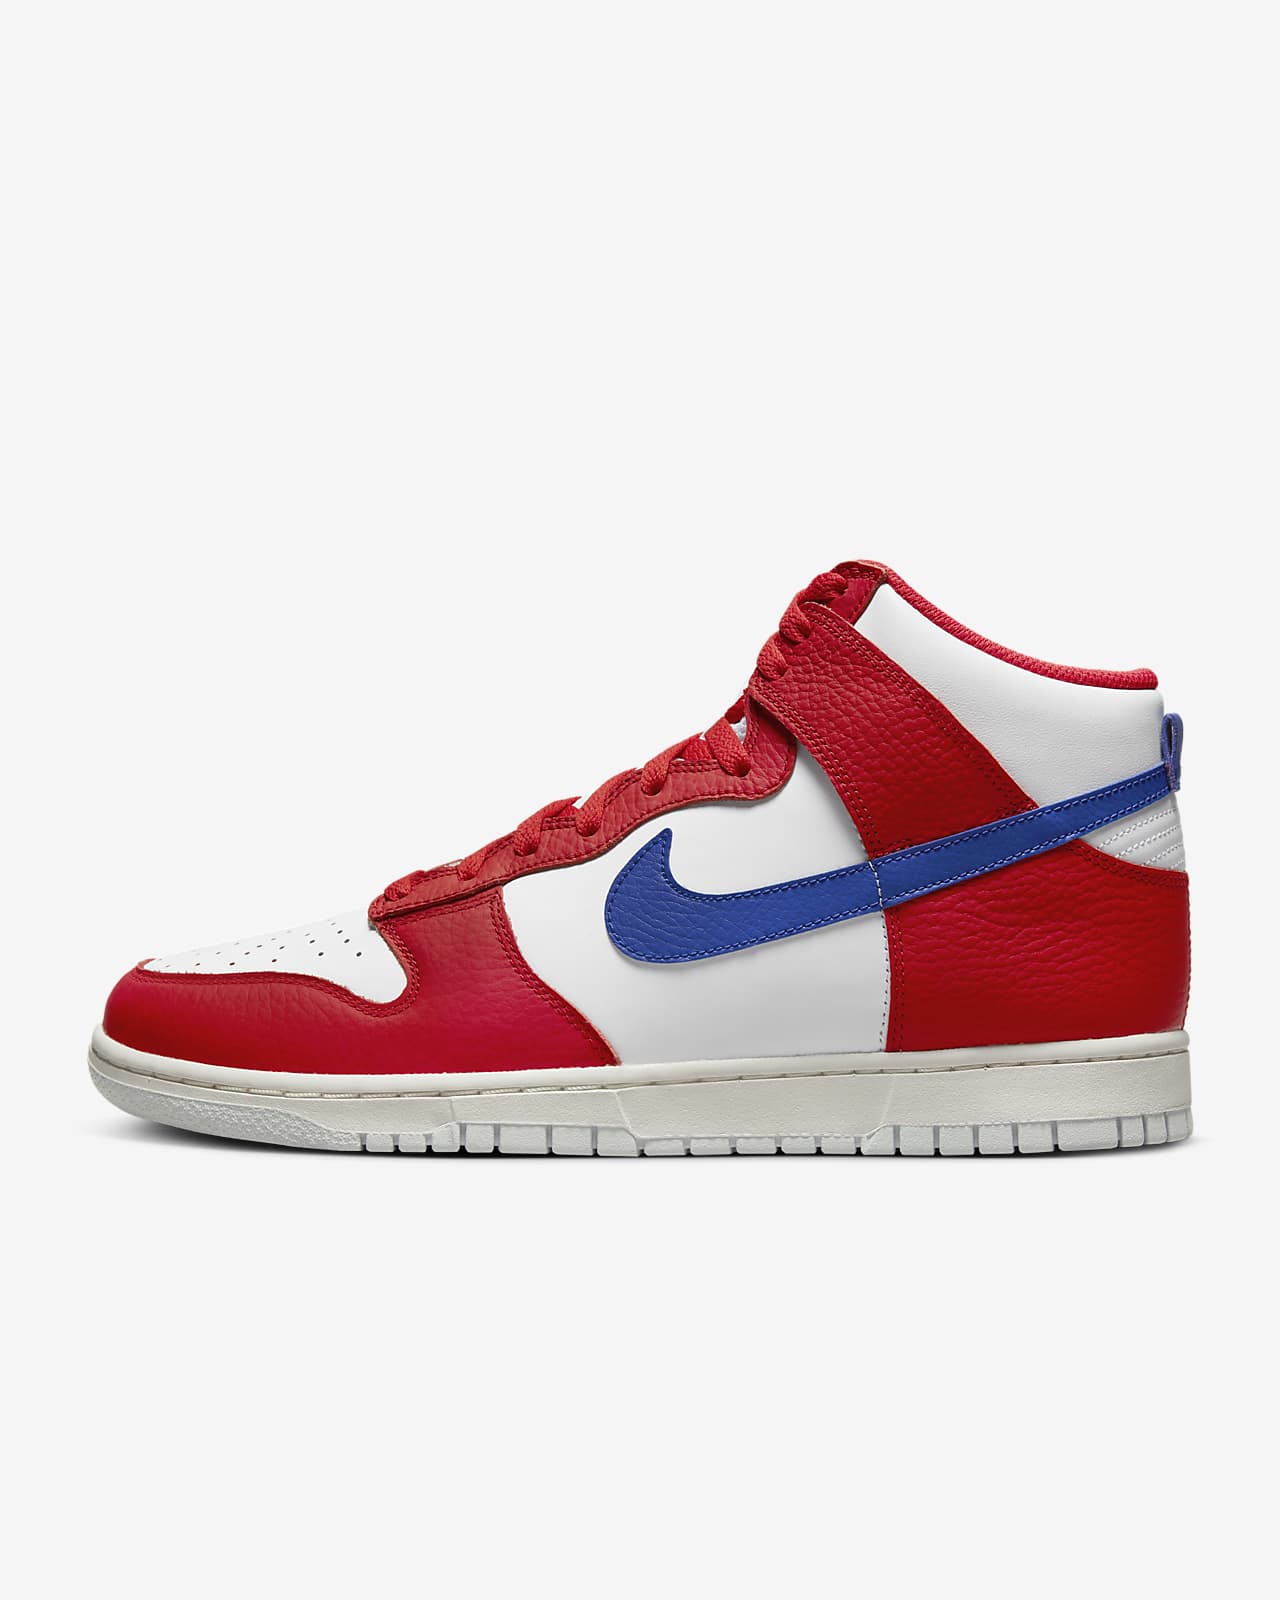 Chaussure Nike Dunk High Retro pour Homme